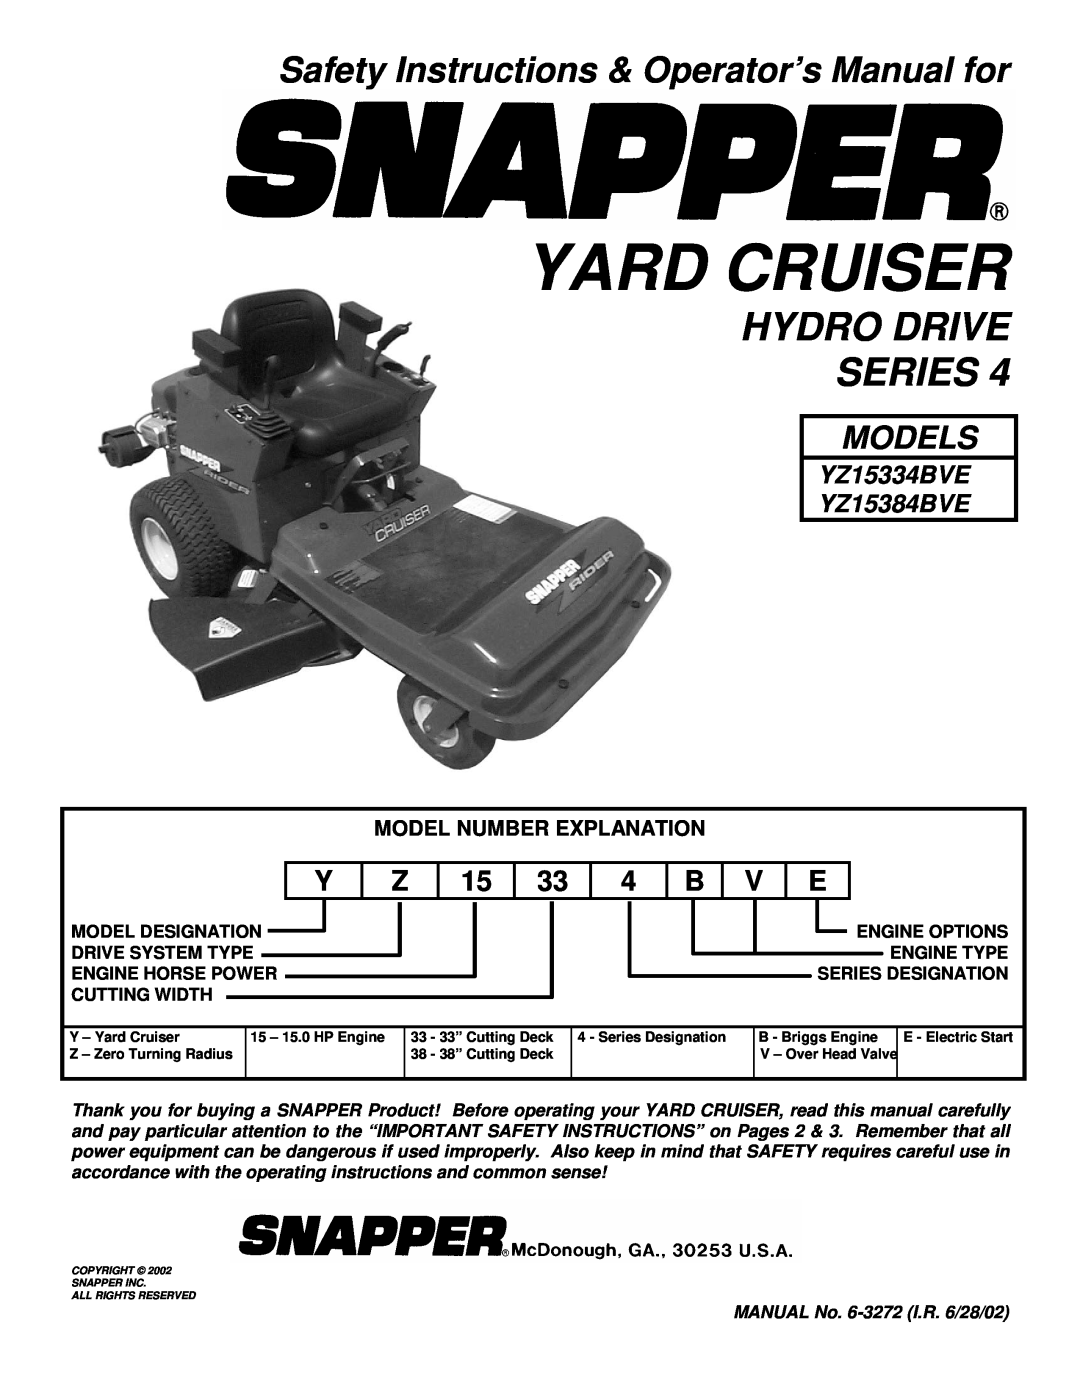 Snapper YZ15384BVE, YZ15334BVE important safety instructions Safety Instructions & Operator’s Manual for, Yard Cruiser 